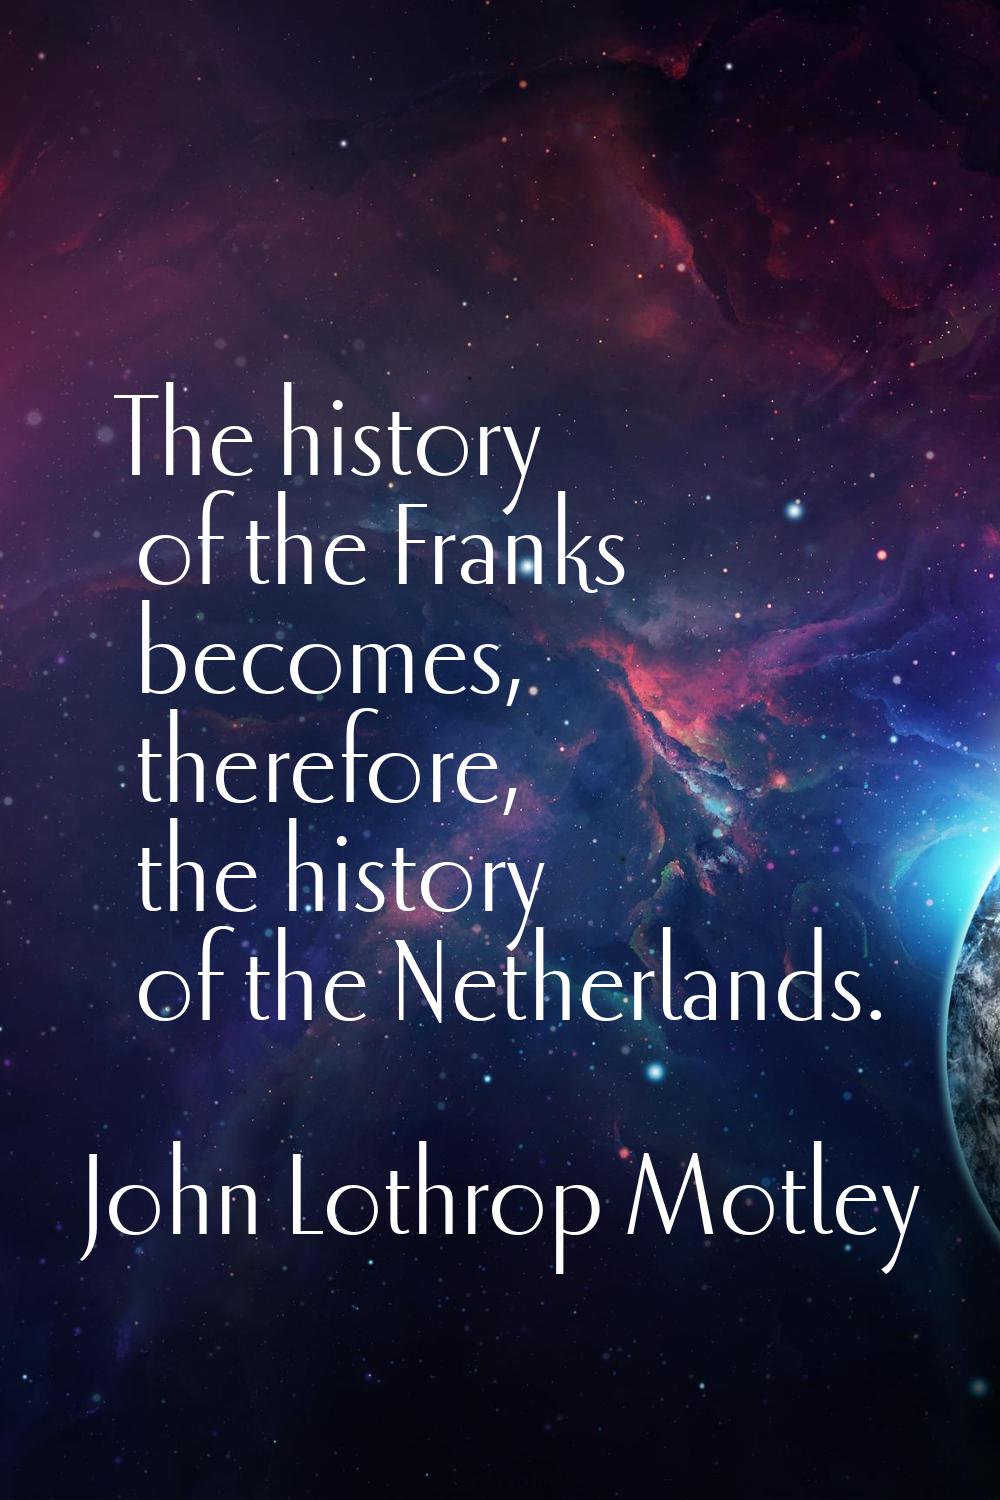 The history of the Franks becomes, therefore, the history of the Netherlands.